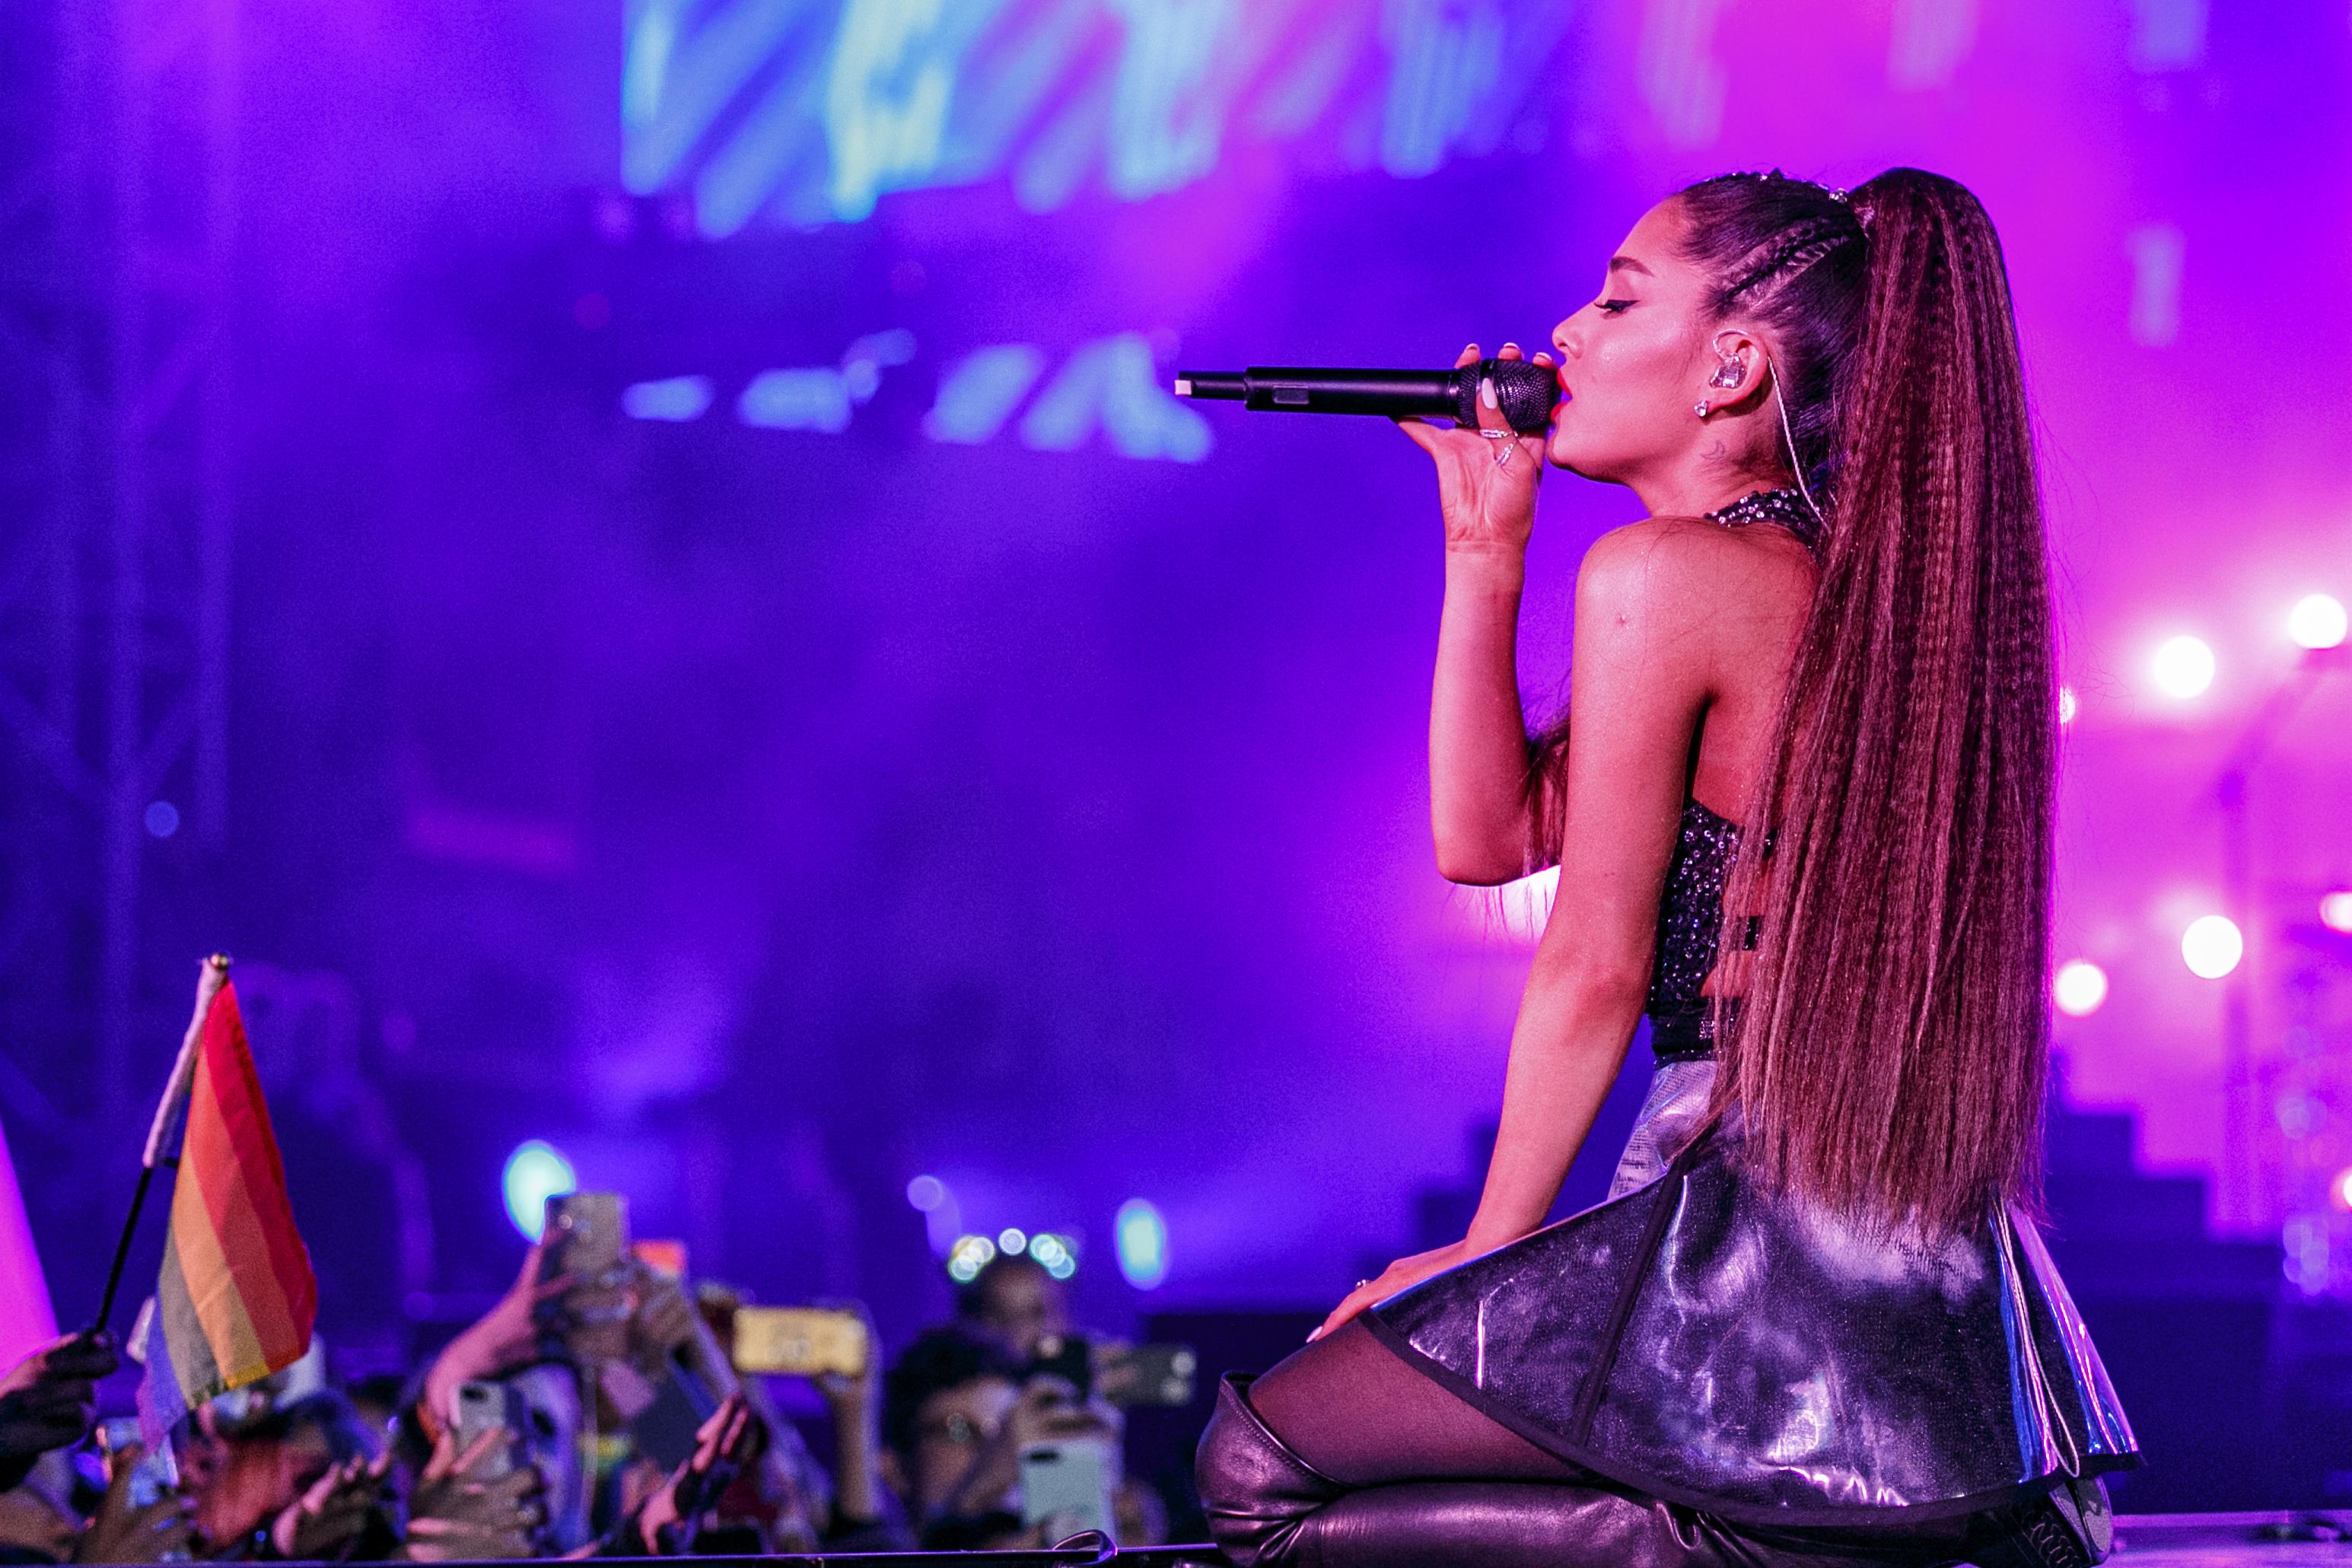 LOS ANGELES, CA - JUNE 02:  (EDITORIAL USE ONLY. NO COMMERCIAL USE) Ariana Grande performs onstage during the 2018 iHeartRadio Wango Tango by AT&T at Banc of California Stadium on June 2, 2018 in Los Angeles, California.  (Photo by Rich Polk/Getty Images for iHeartMedia )